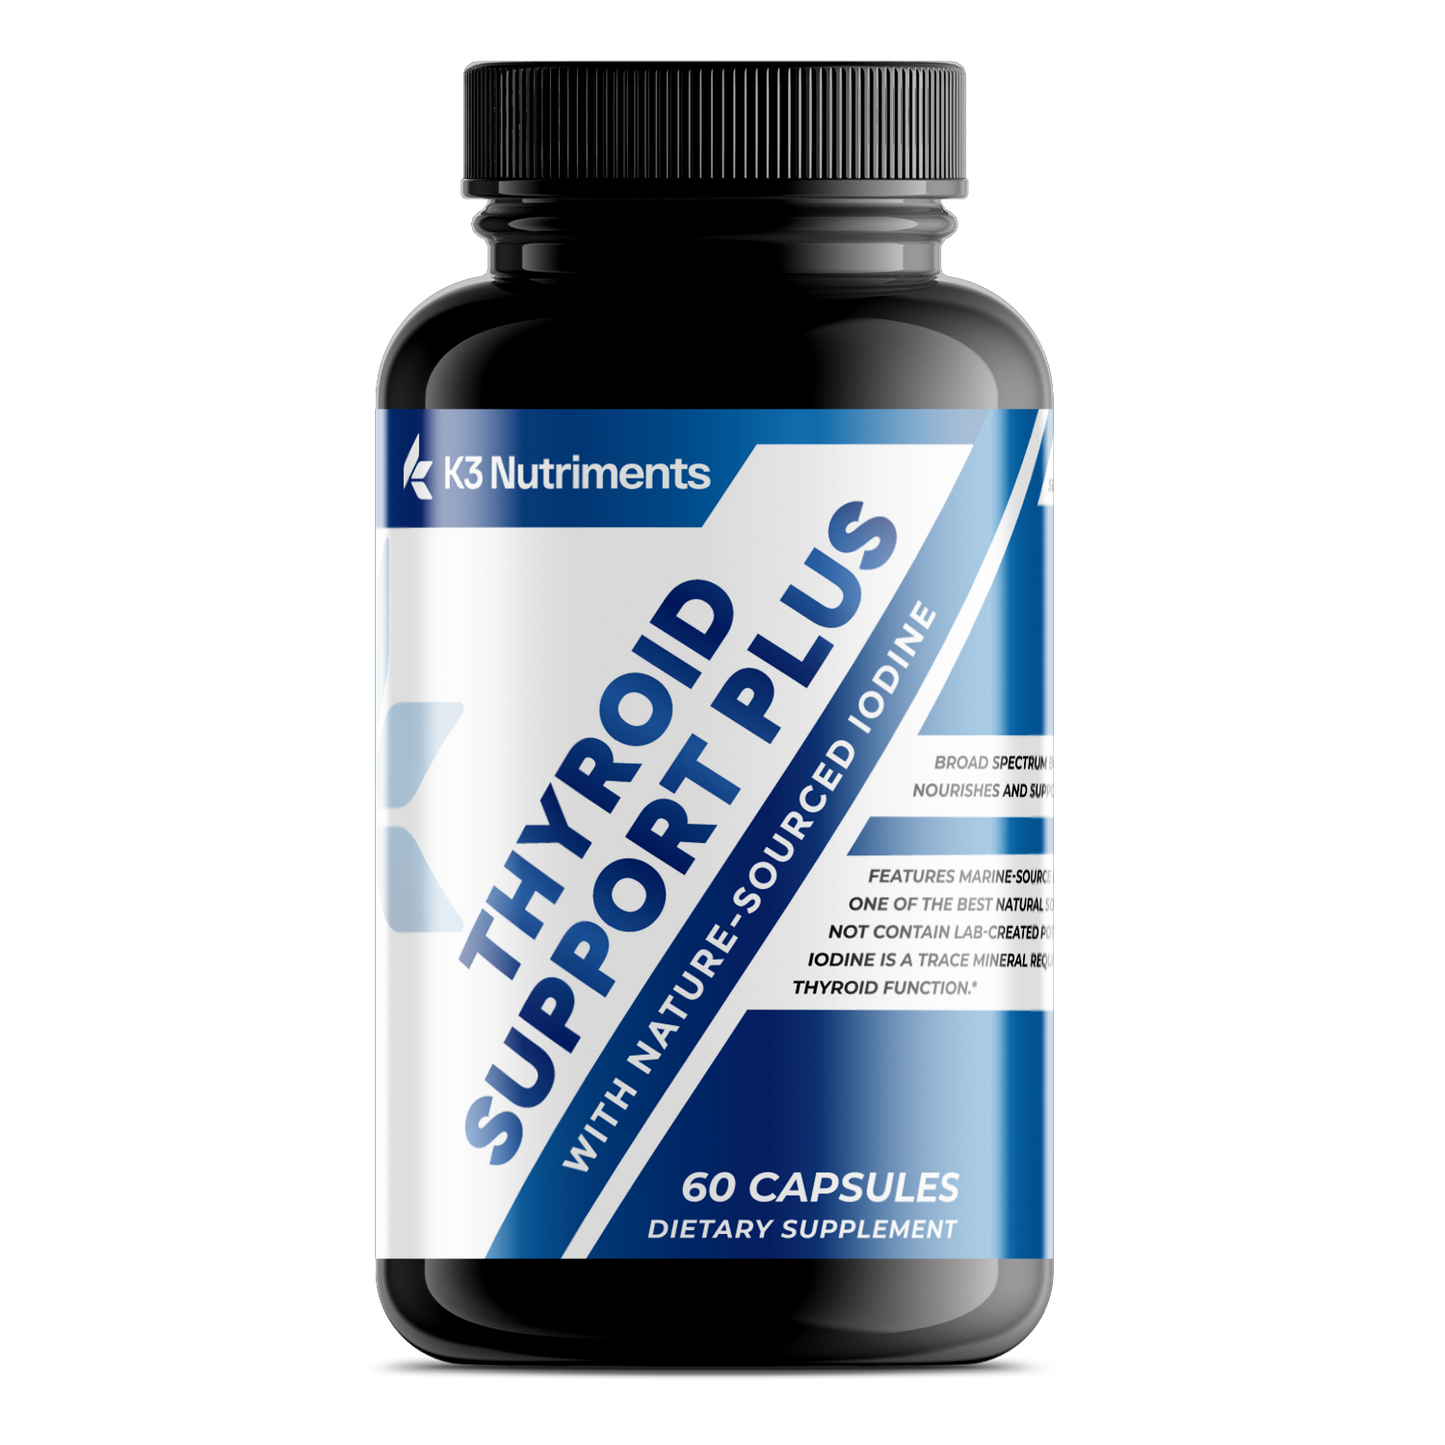 Thyroid Support Plus